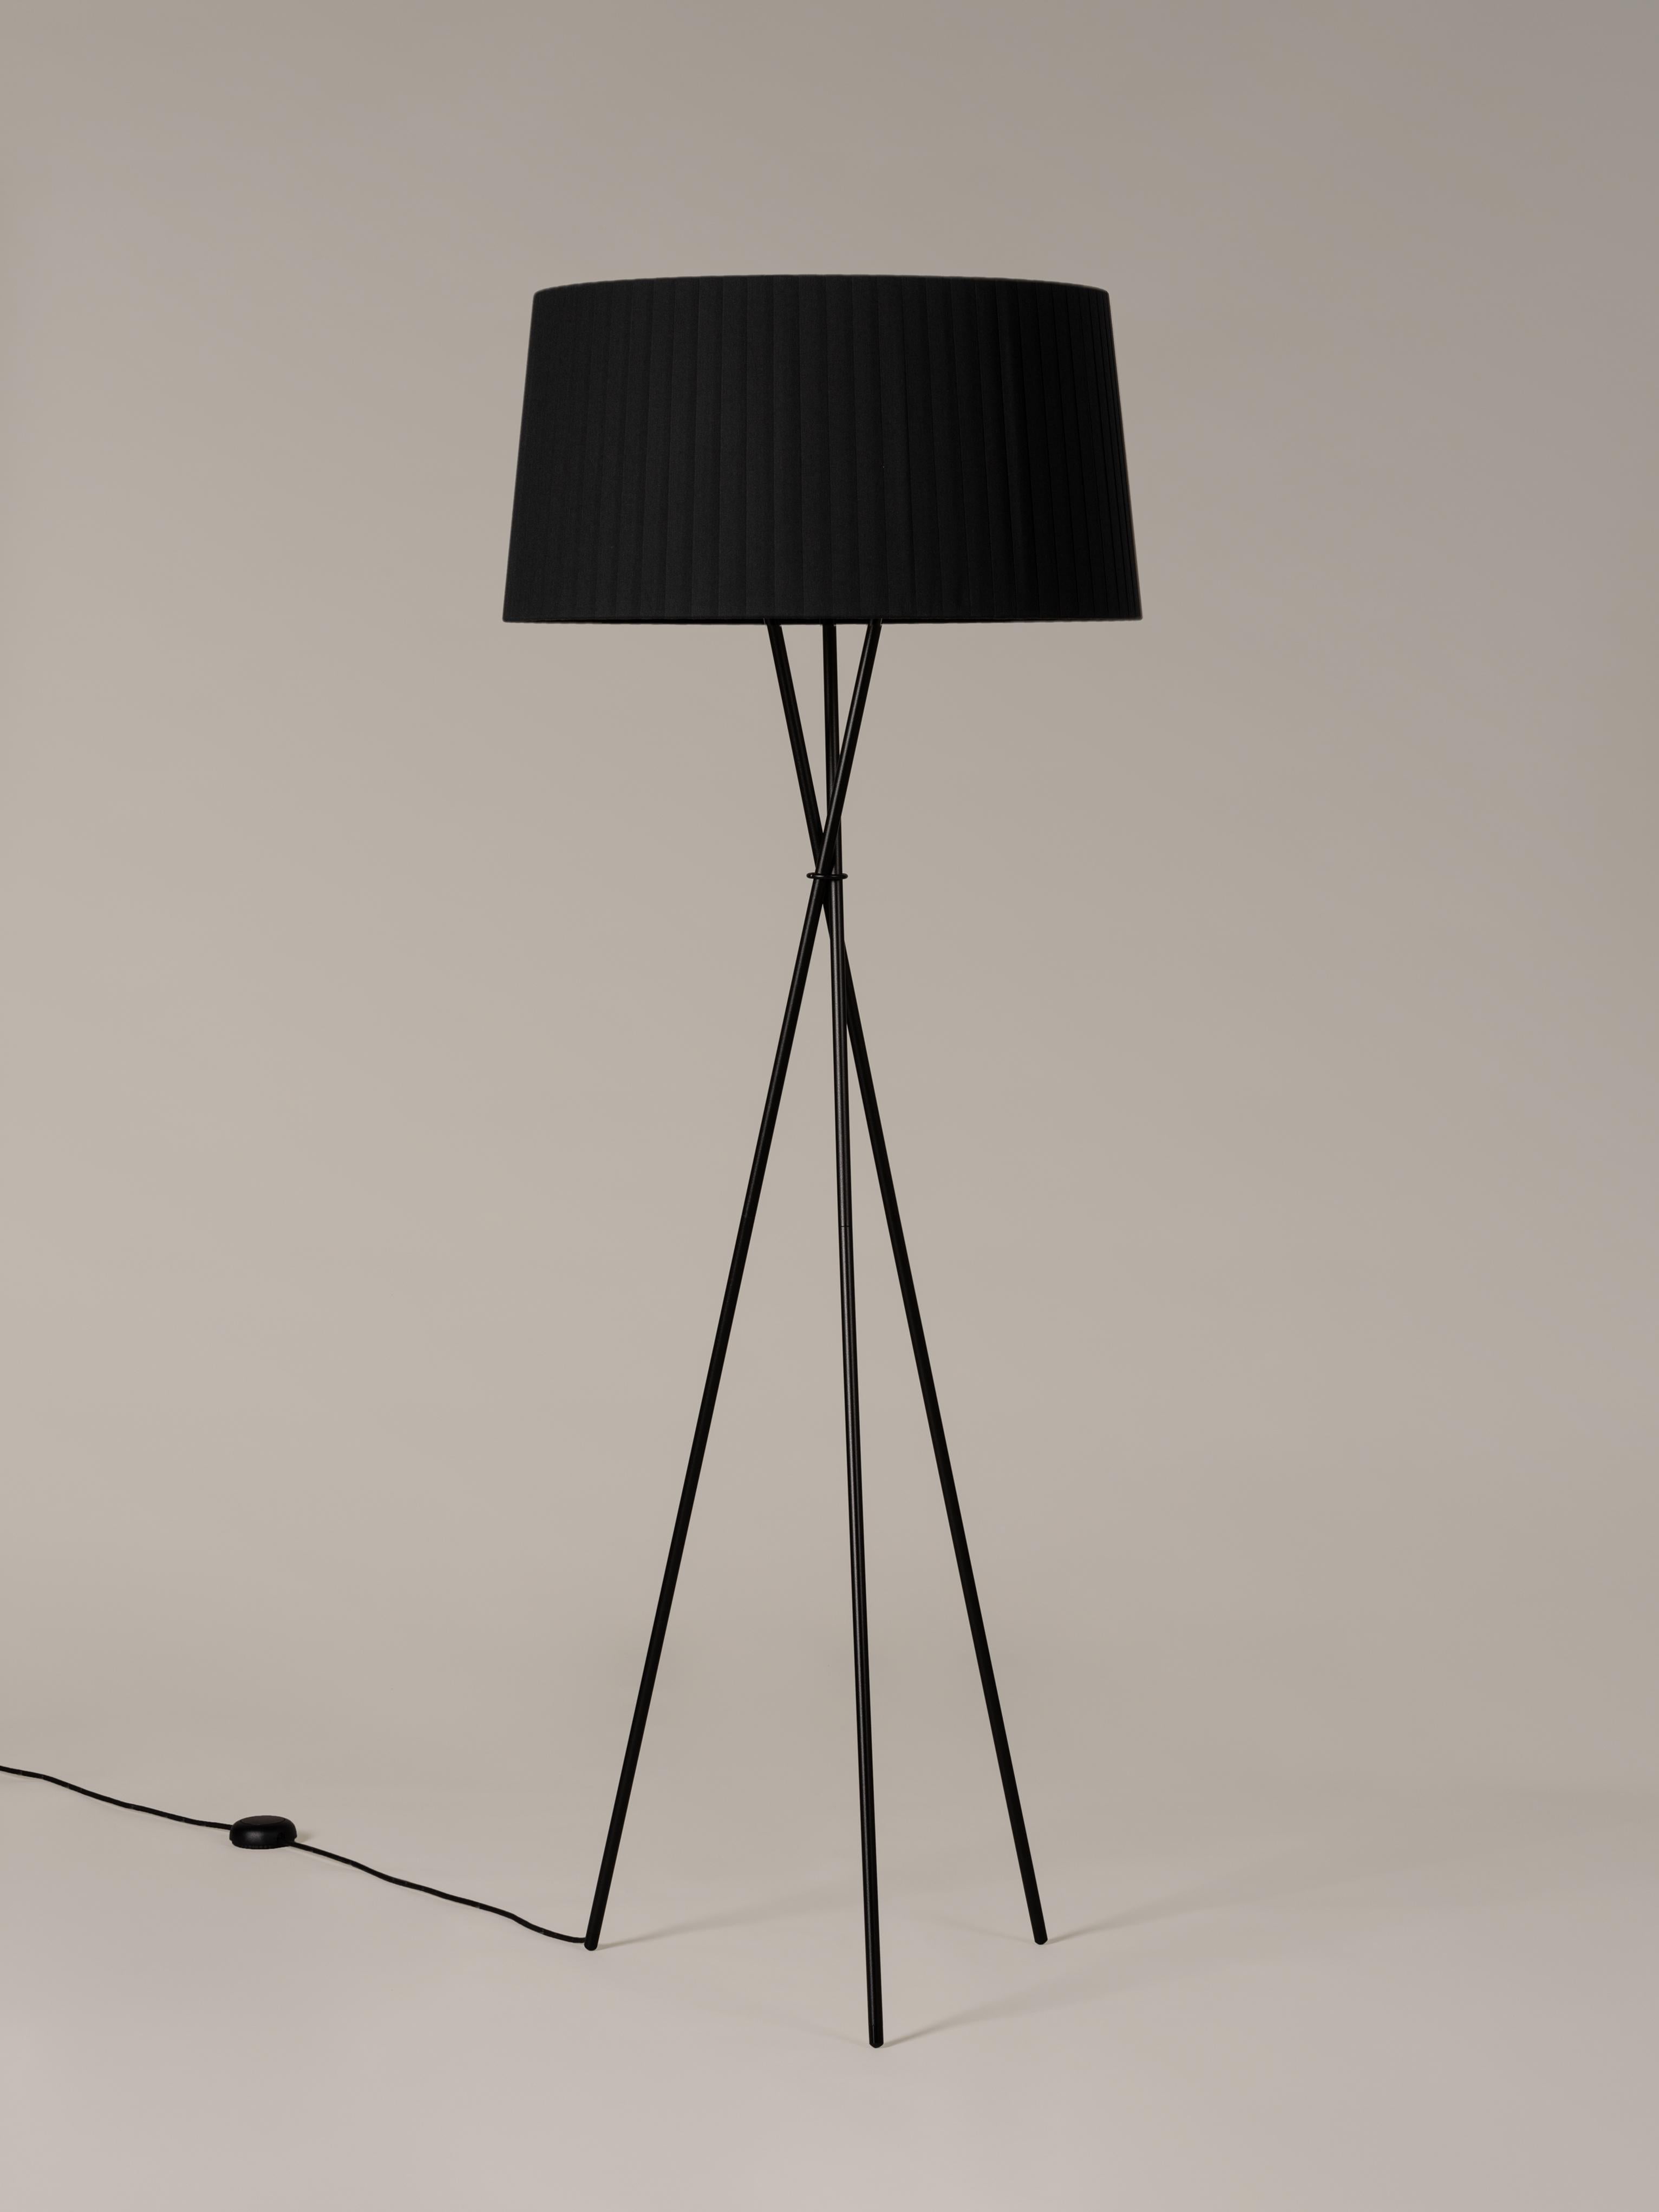 Black Trípode G5 floor lamp by Santa & Cole.
Dimensions: D 62 x H 168 cm.
Materials: metal, ribbon.
Available in other colors.

Trípode humanises neutral spaces with its colourful and functional sobriety. The shade is hand ribboned and its base